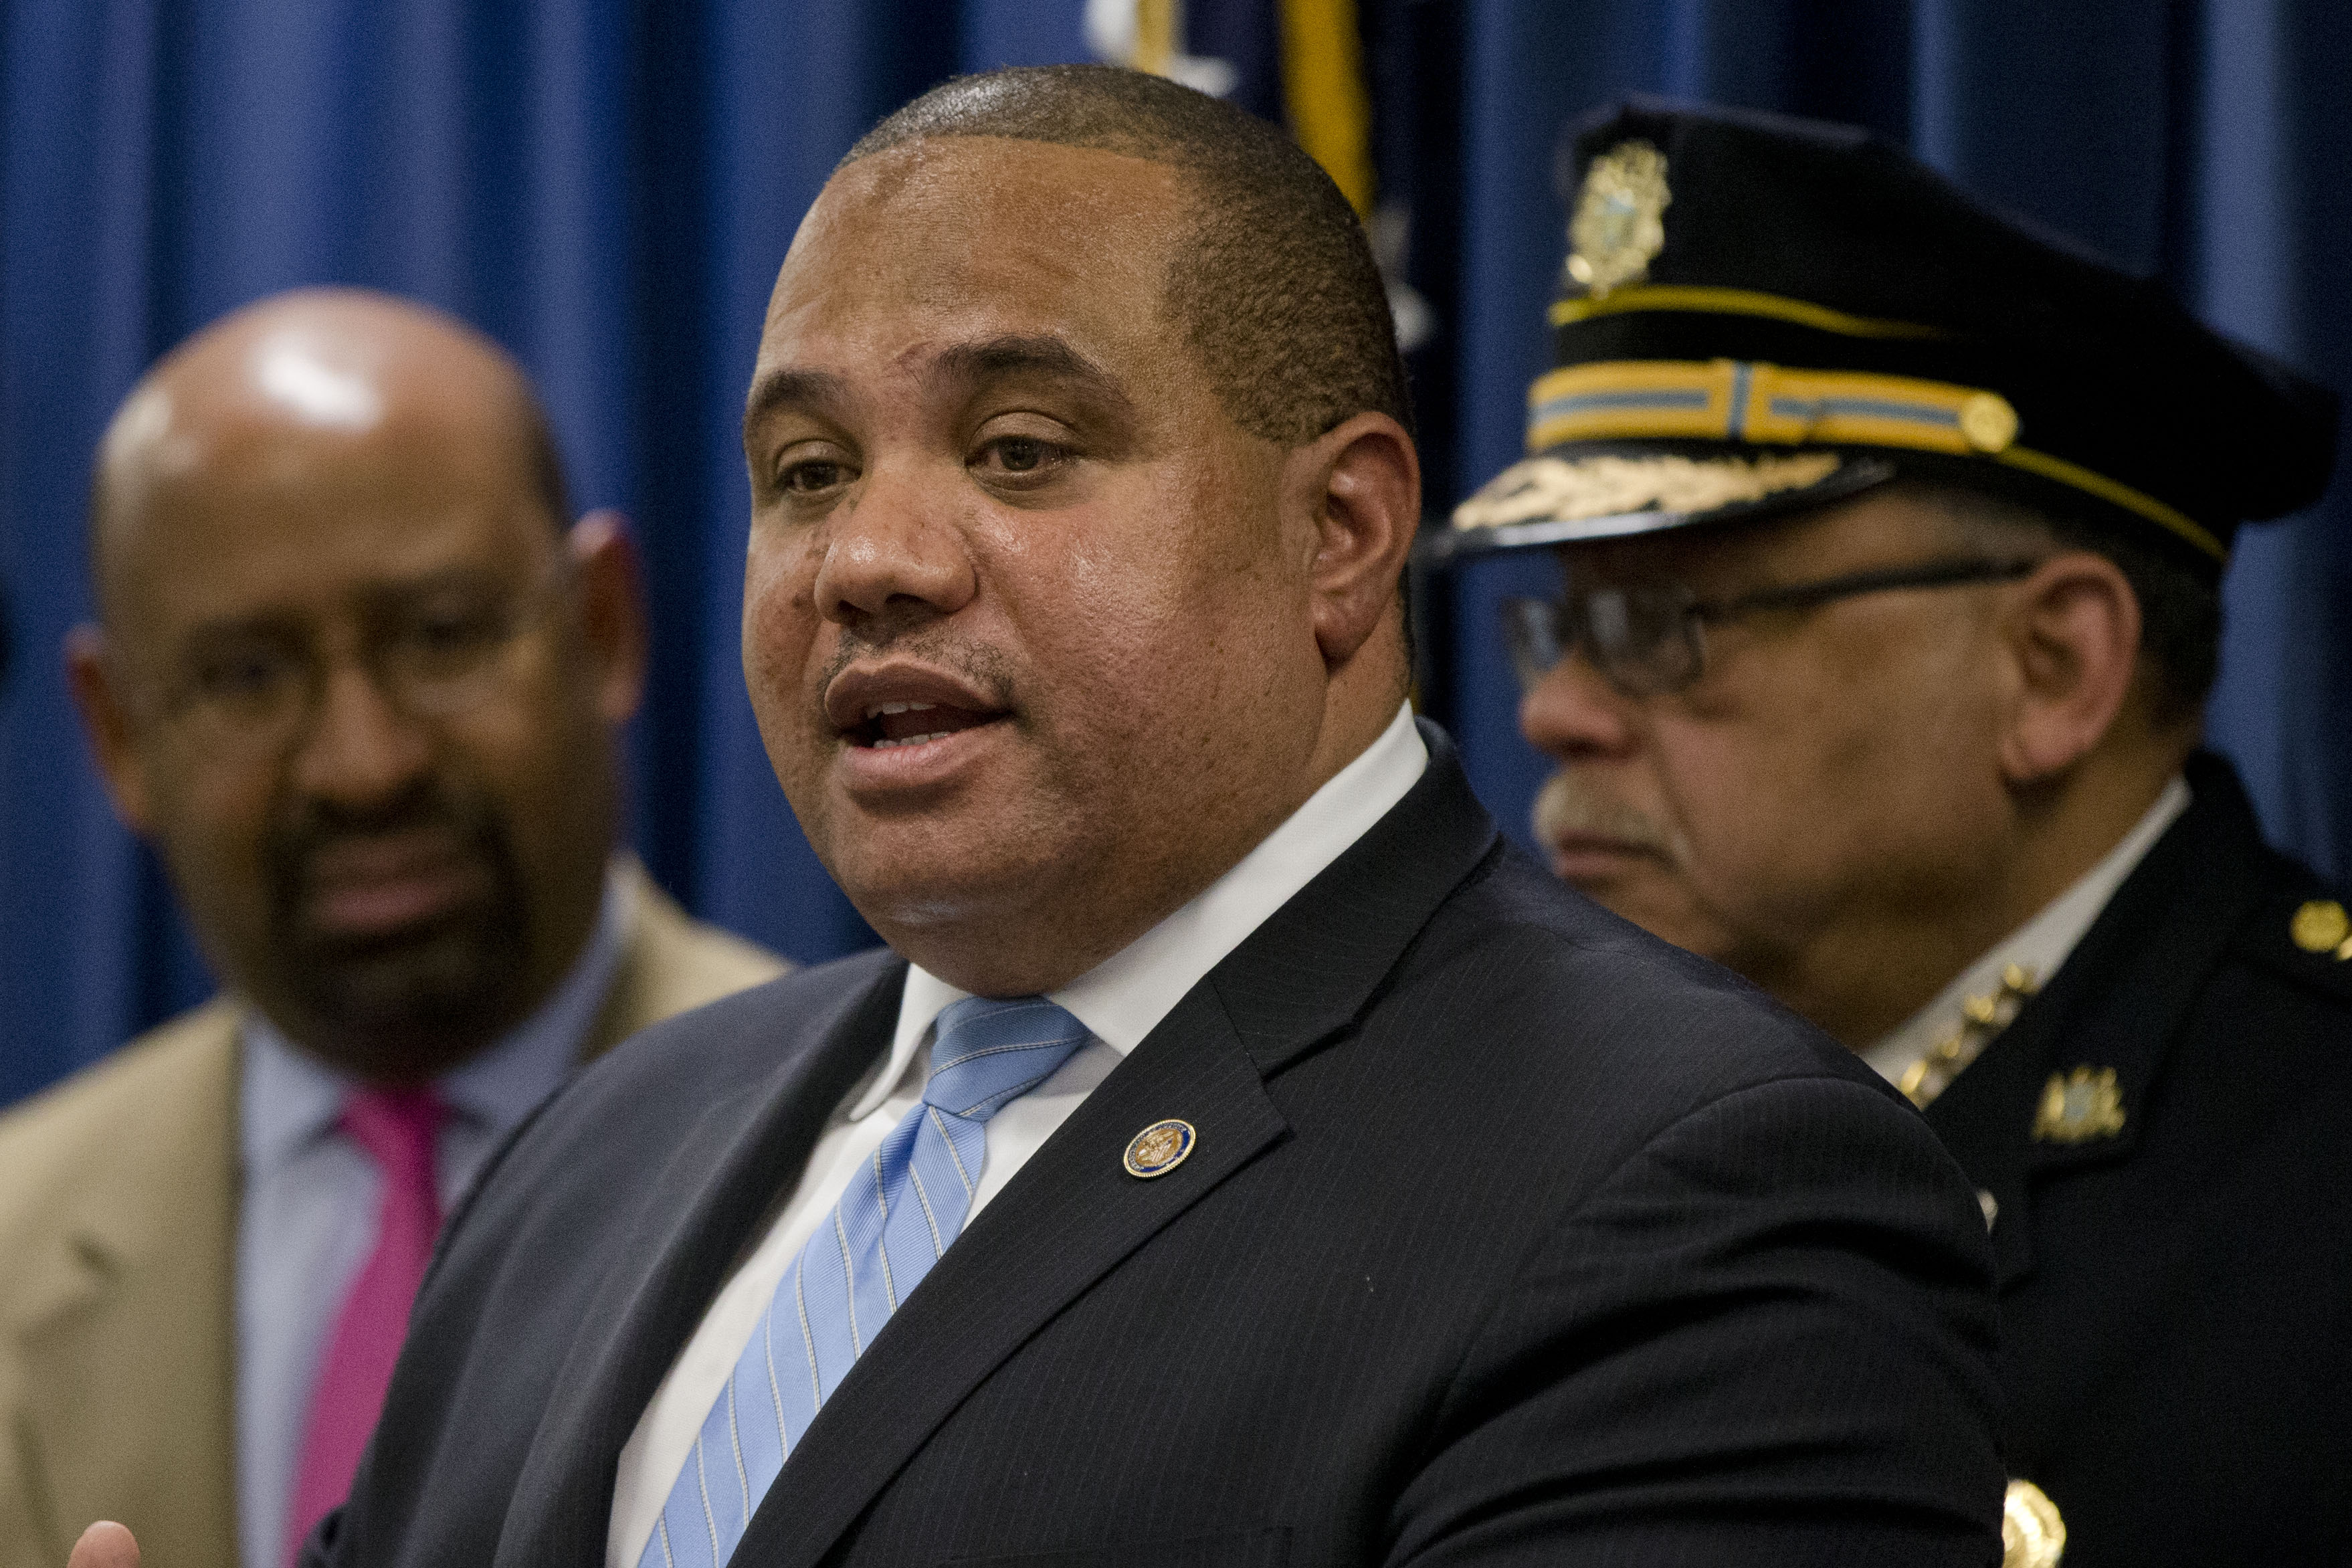 Philadelphia Police Commissioner Charles Ramsey, right, and Mayor Michael Nutter, left, listen to Department of Justice’s Ronald Davis, director of the Office of Community Oriented Policing Services (COPS) speak during a news conference Tuesday, Dec. 22, 2015, in Philadelphia. Justice Department officials are praising the Philadelphia Police Department for its progress in implementing reforms after a federal probe on deadly force. The report issued in May found the department's use of deadly force was motivated by fear and affected mostly black citizens. (AP Photo/Matt Rourke)